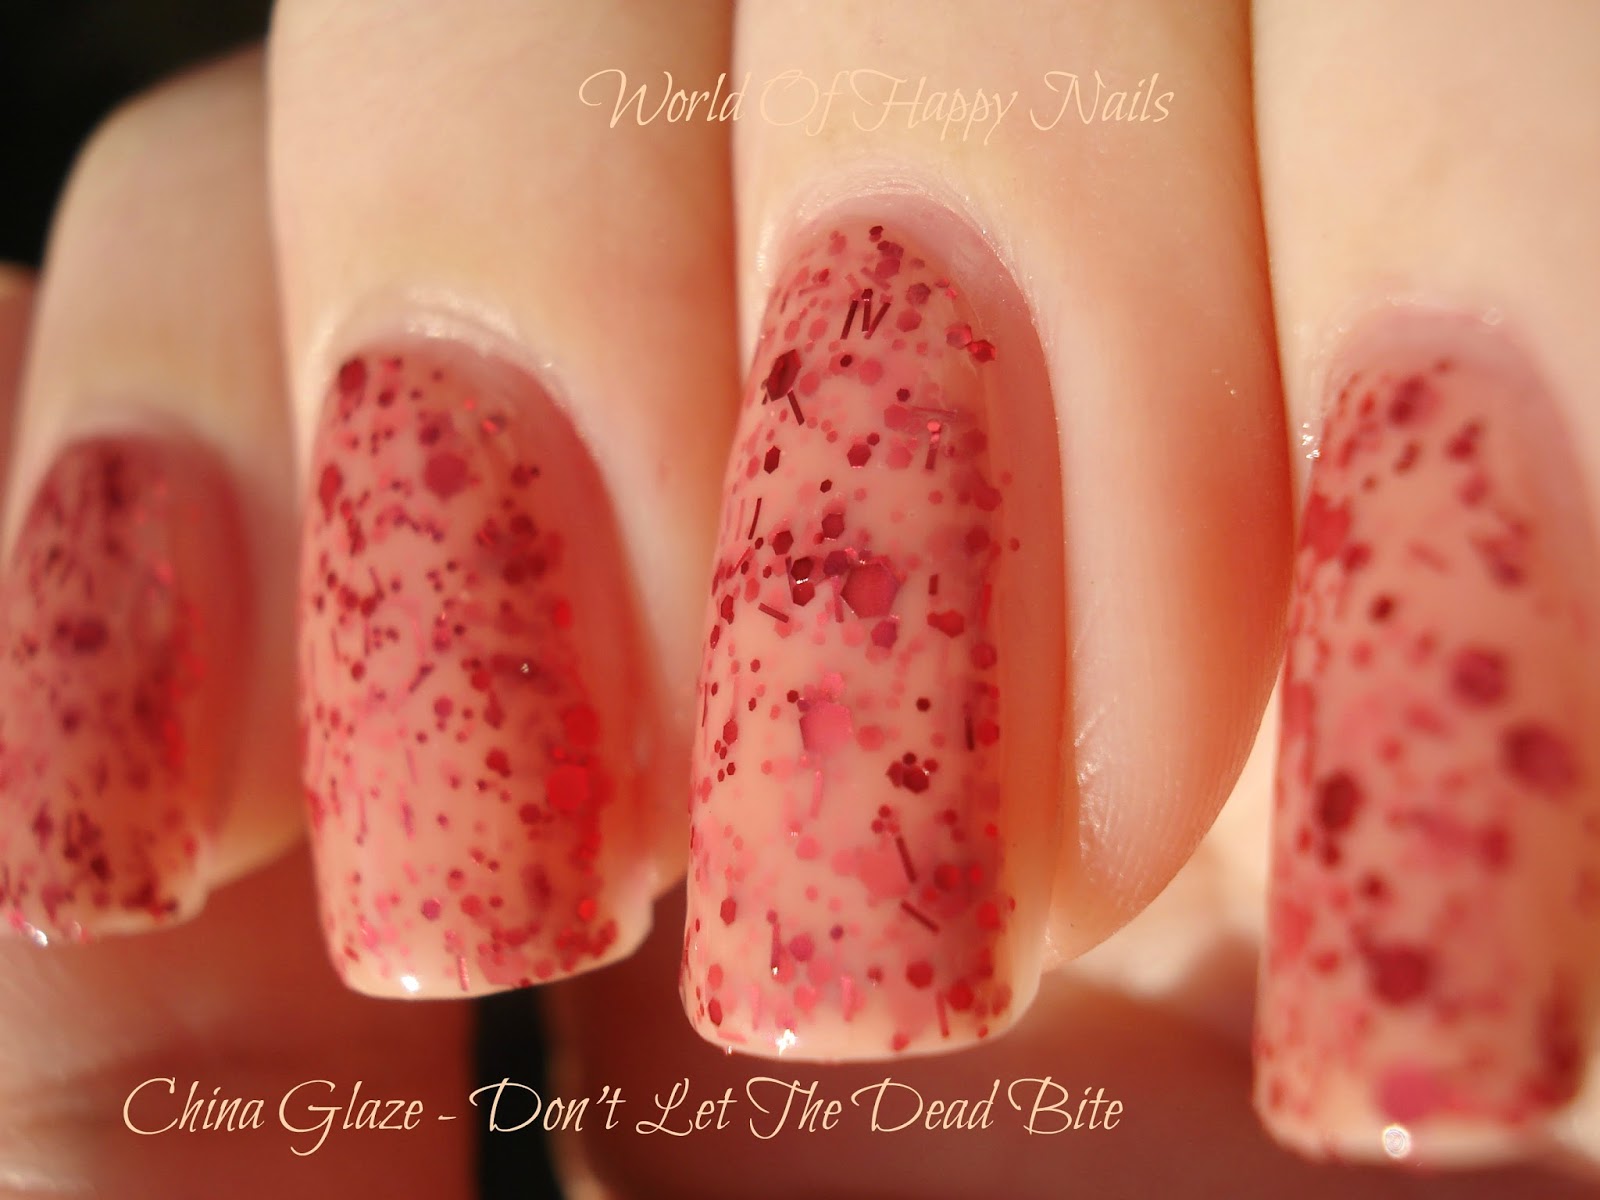 5. China Glaze Nail Lacquer in Don't Let the Dead Bite - wide 2